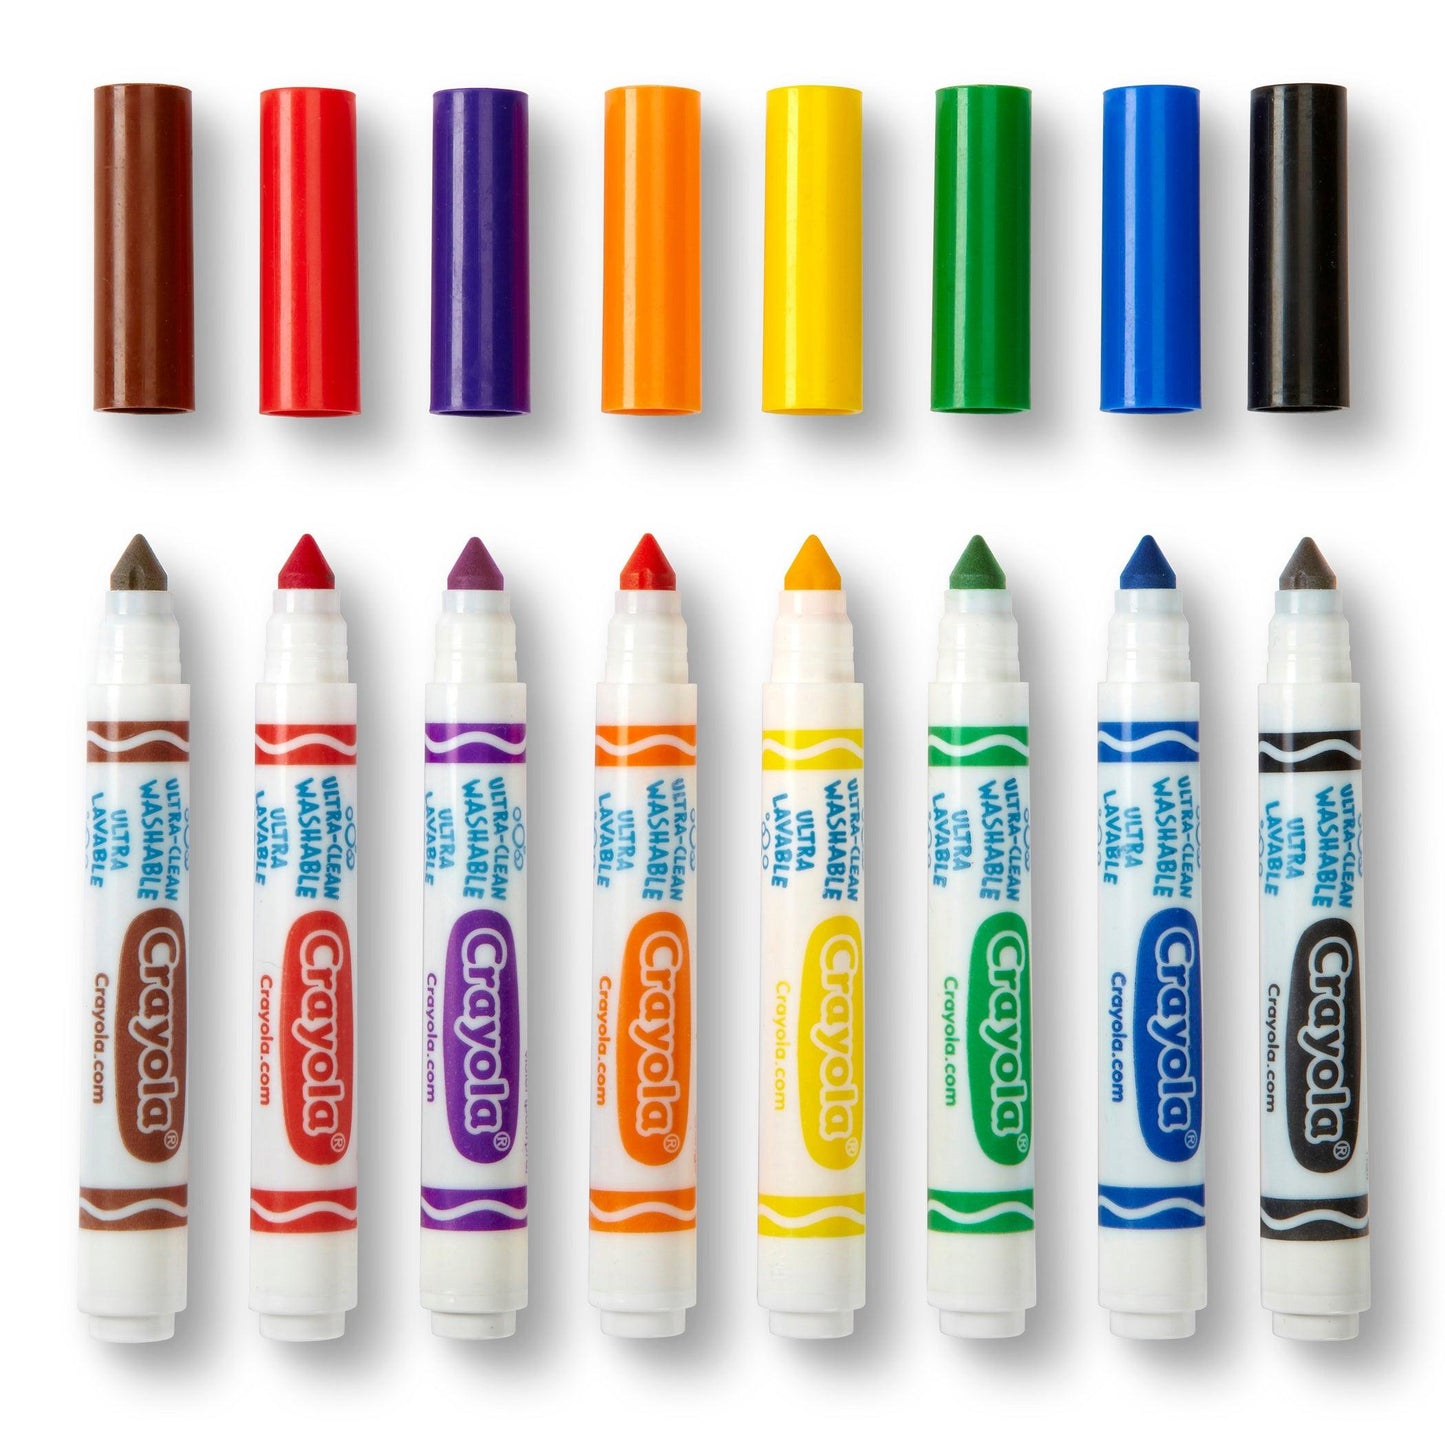 Ultra-Clean Markers, Conical Tip, Classic Colors, 8 Per Box, 6 Boxes - Loomini